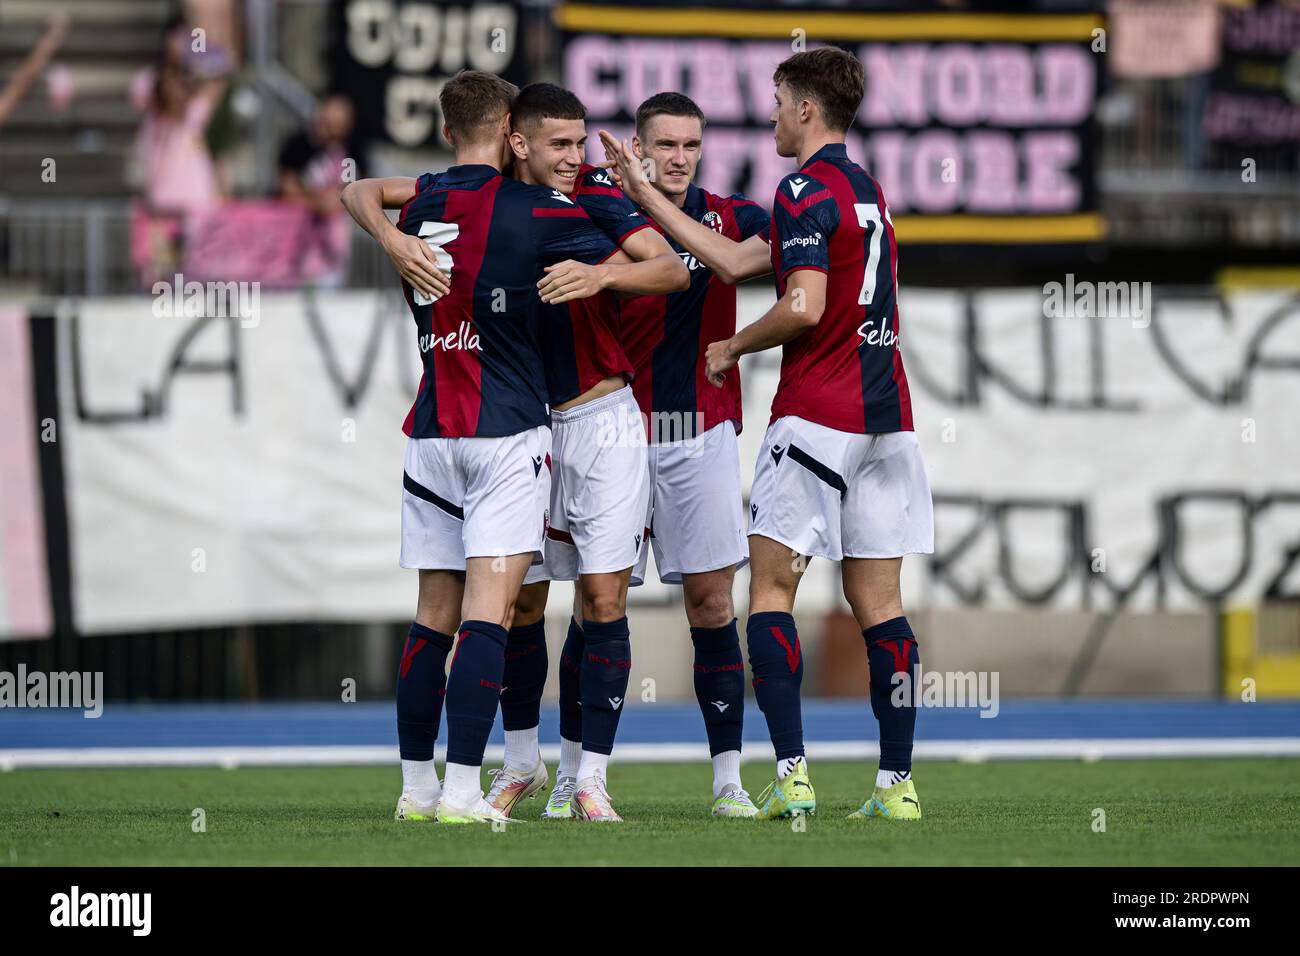 Antonio Raimondo of Bologna FC celebrates with his teammates after scoring a goal during the pre-season friendly football match between Bologna FC and Palermo FC. Stock Photo